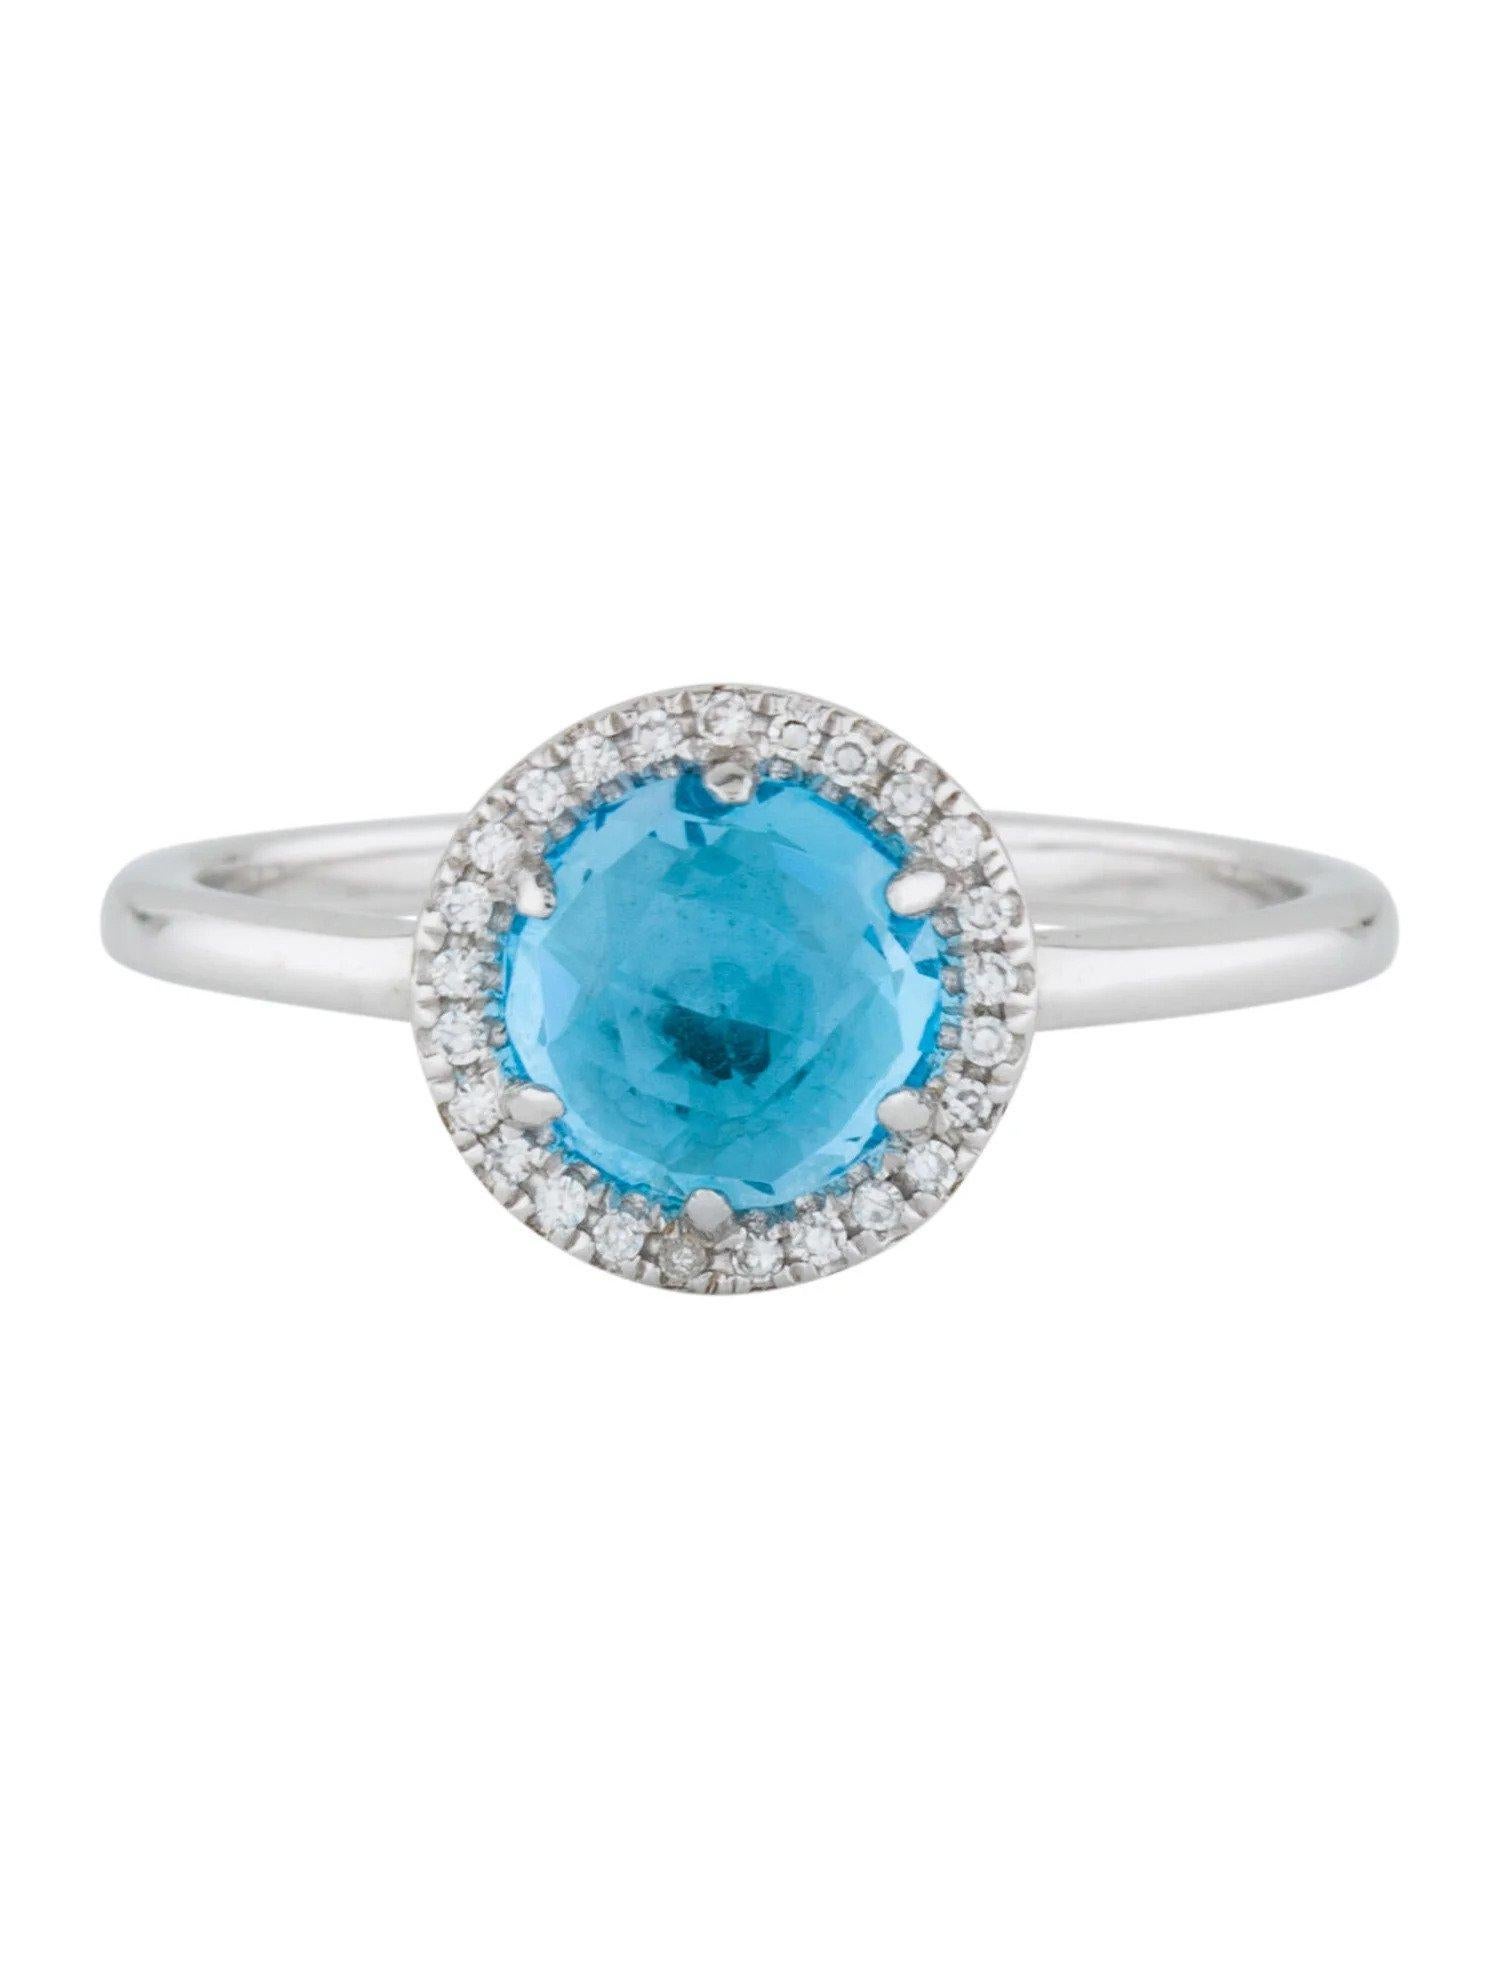 This Swiss Blue Topaz & Diamond Ring is a stunning and timeless accessory that can add a touch of glamour and sophistication to any outfit. 

This ring features a 1.41 Carat Round Swiss Blue Topaz, with a Diamond Halo comprised of 0.06 Carats of